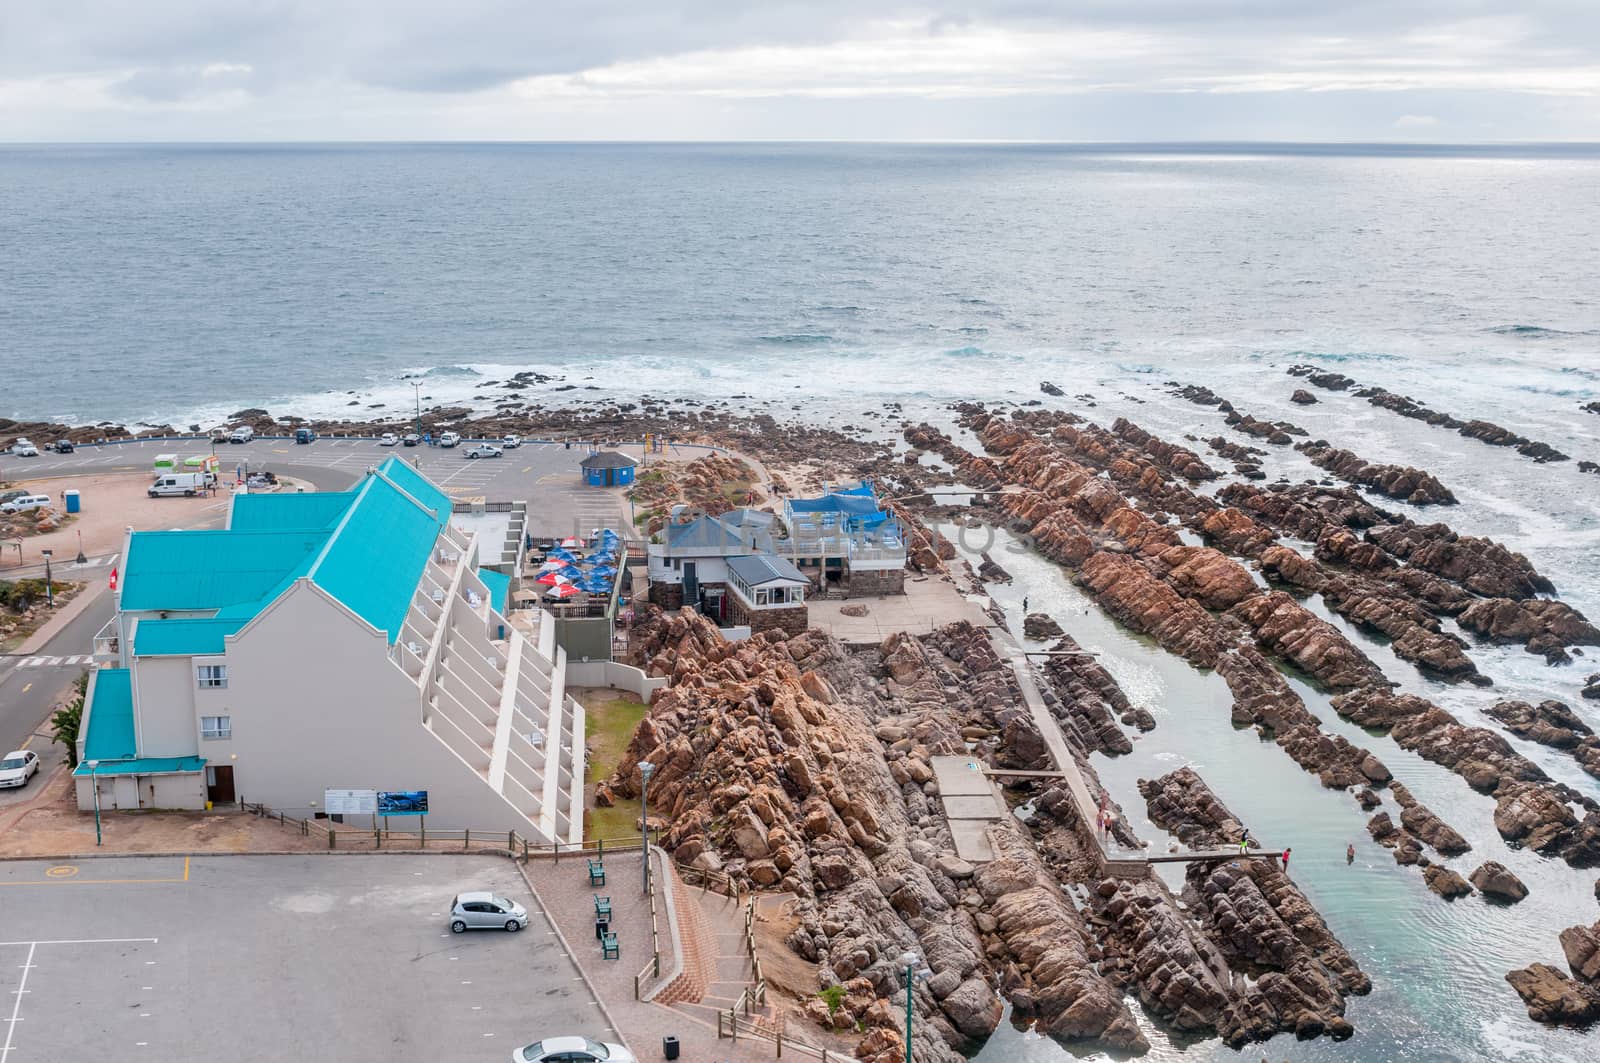 MOSSELBAY, SOUTH AFRICA - DECEMBER 31, 2014: View from the cave at Cape St. Blaize towards the hotel and swimming pool at The Point